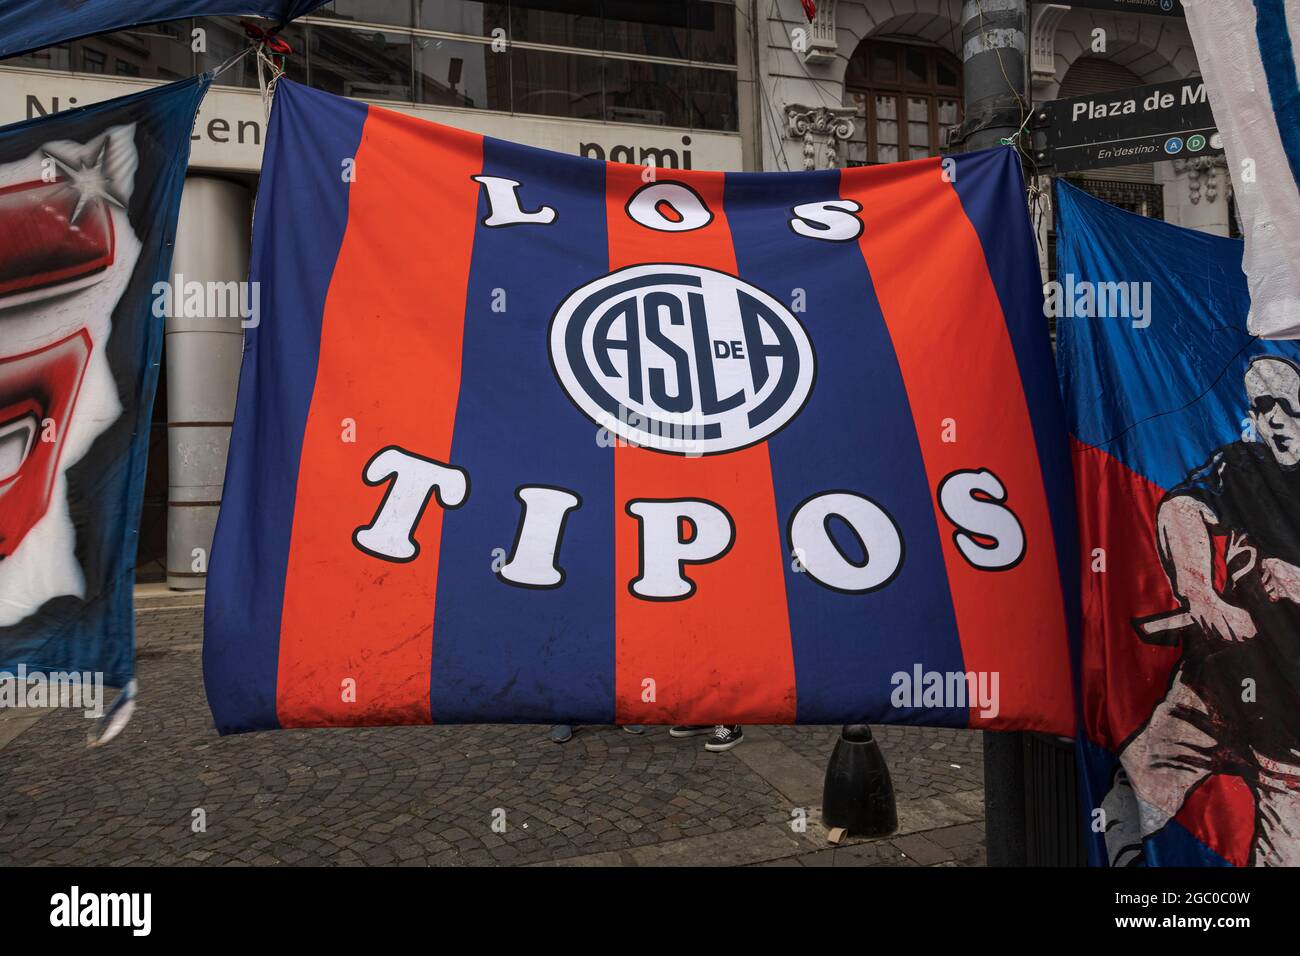 Buenos Aires, Argentina. August 5th 2021: Club San Lorenzo fan flag. (Photo by Esteban Osorio/Pacific Press) Credit: Pacific Press Media Production Corp./Alamy Live News Stock Photo